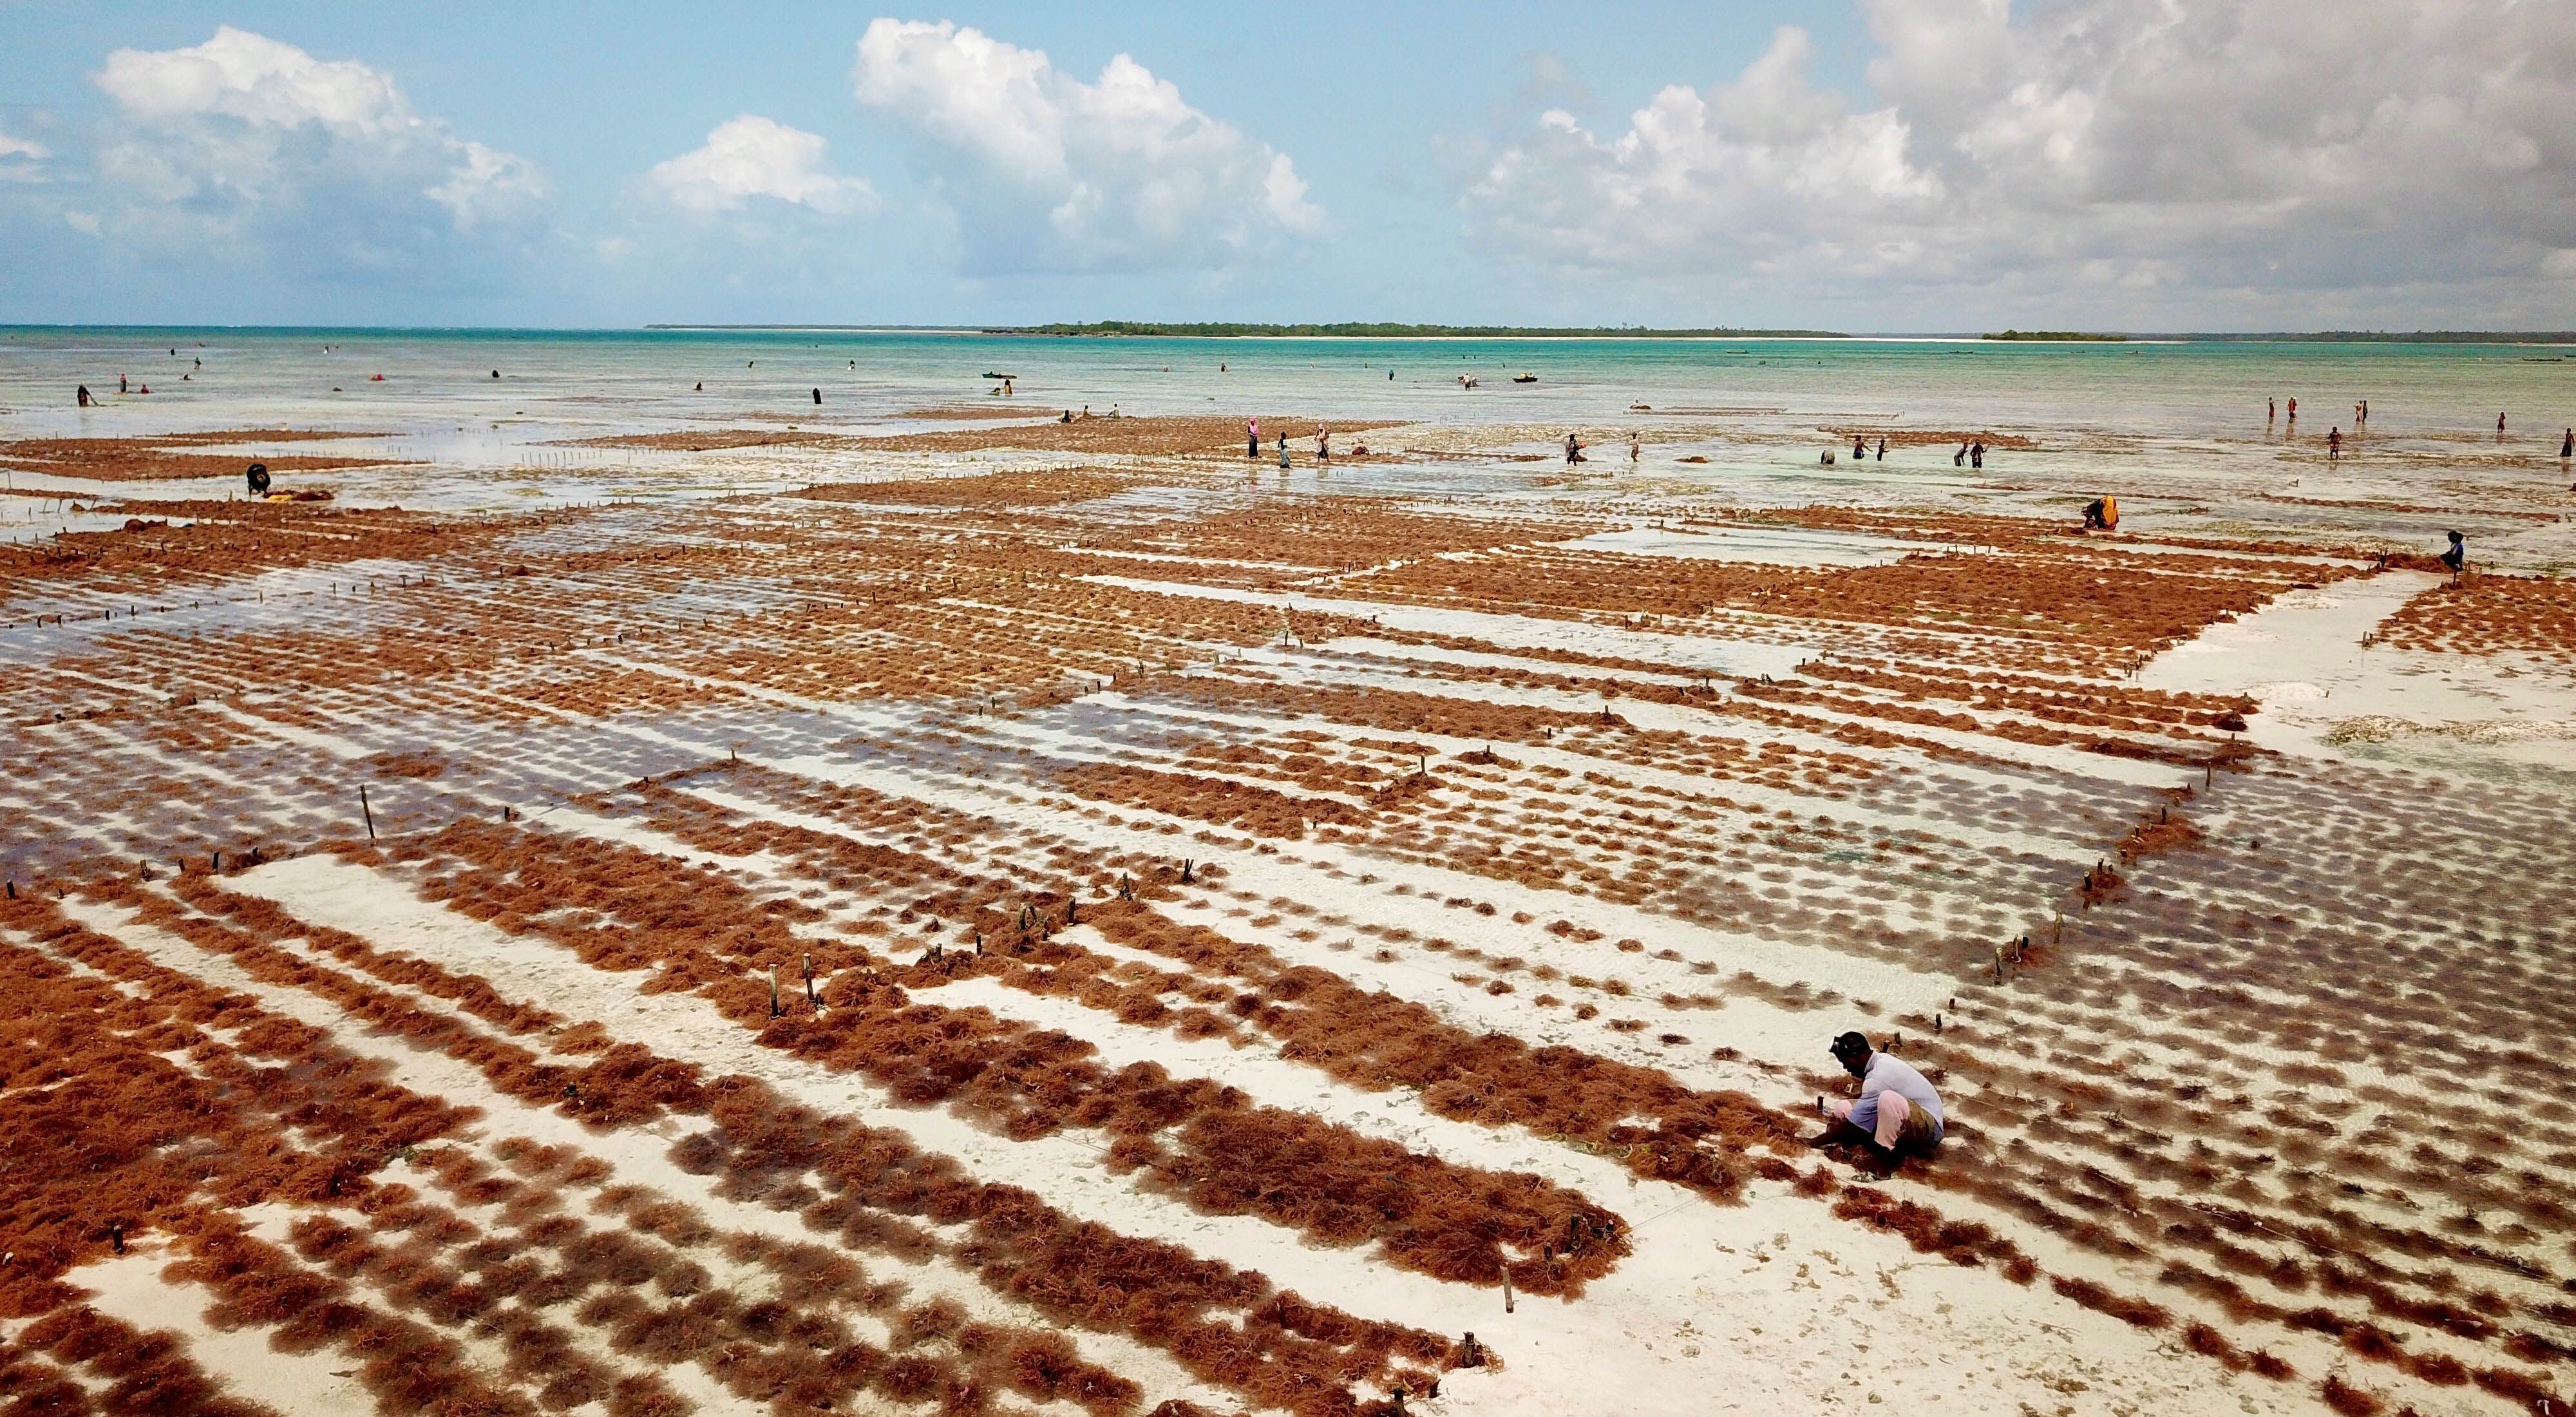 A wide view of rows of red seaweed growing in shallow water, with people tending to the rows.